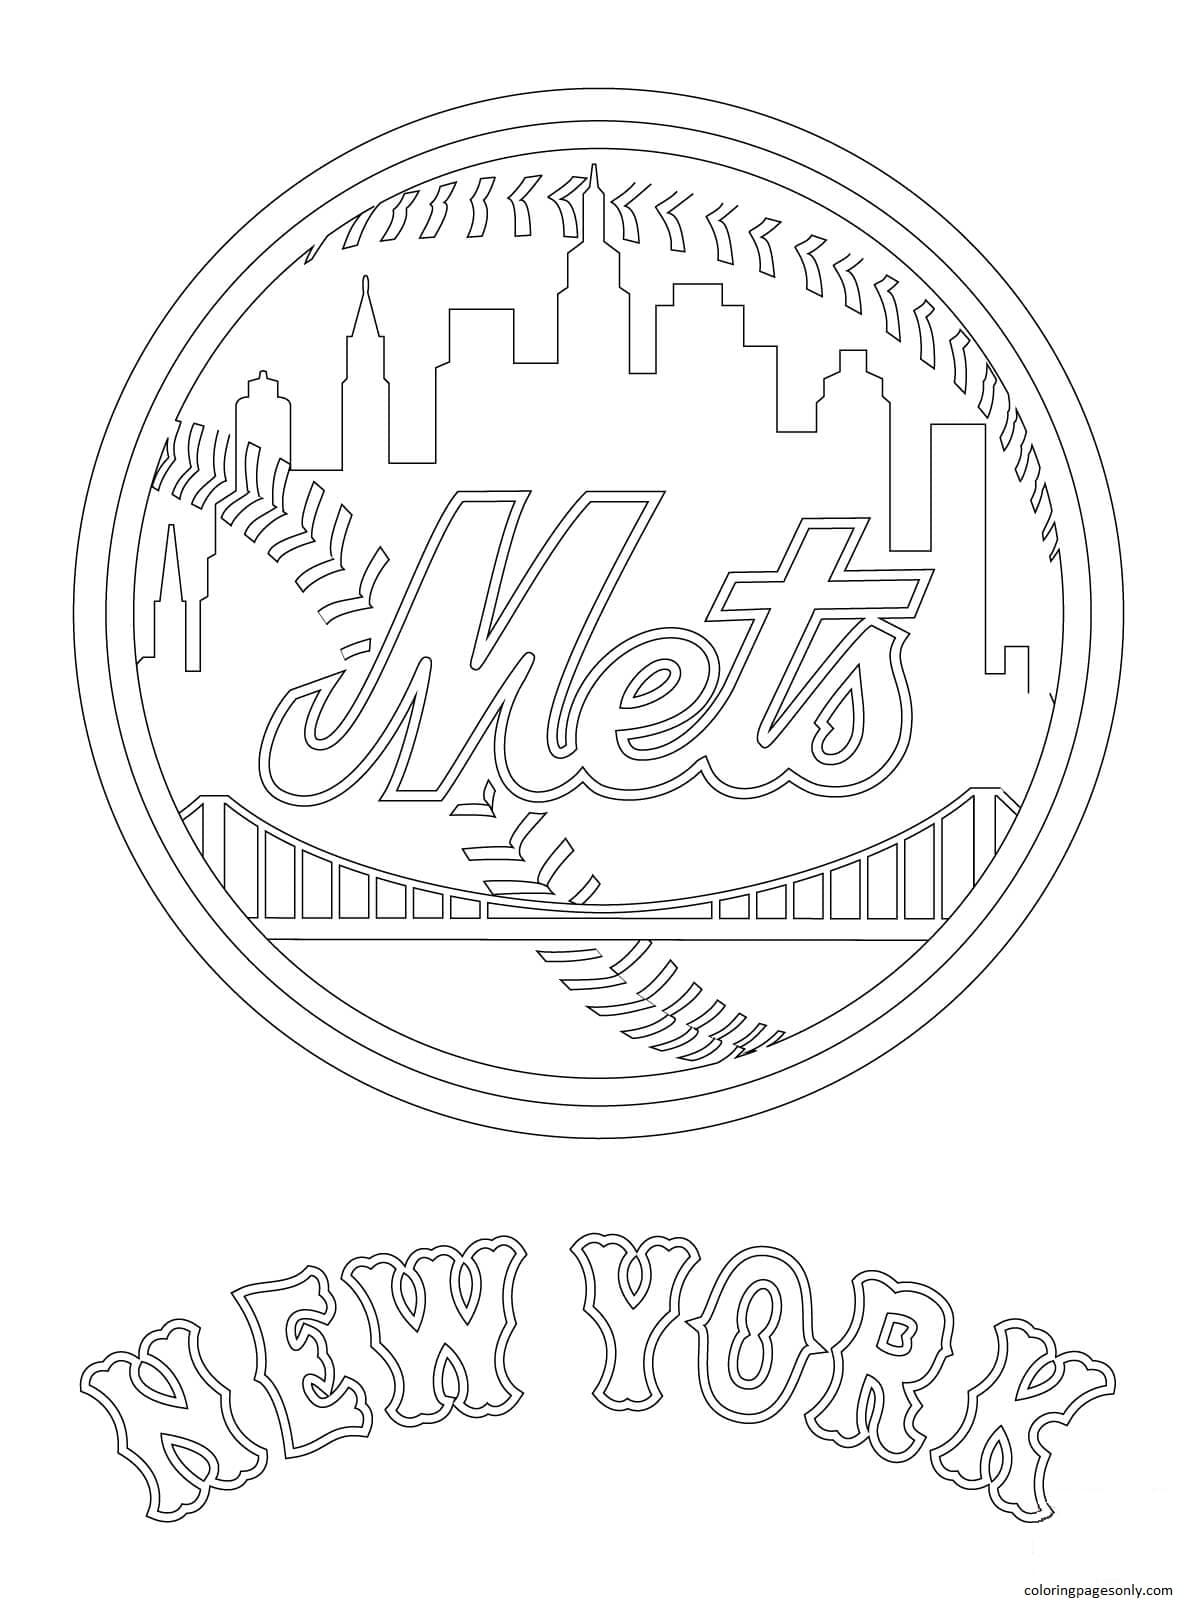 New York Mets Logo Coloring Page